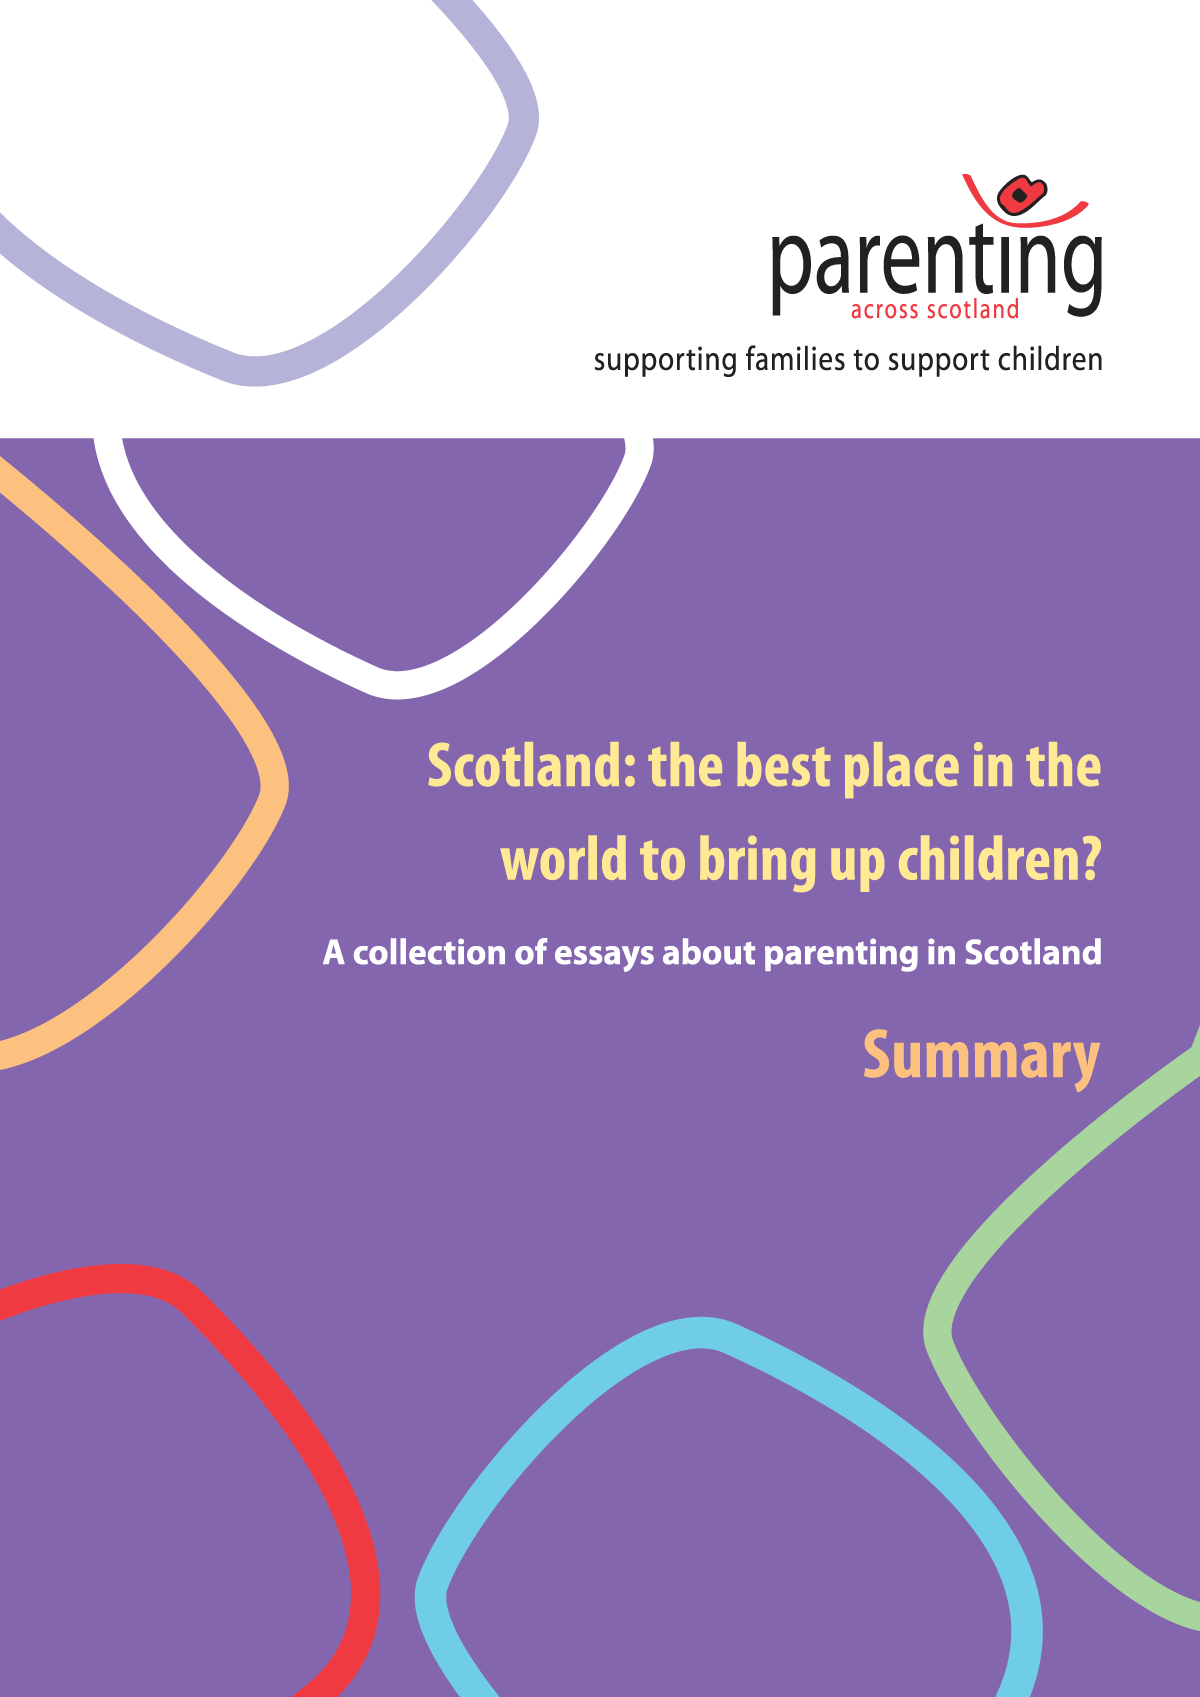 Scotland: the best place to bring up children? (summary)